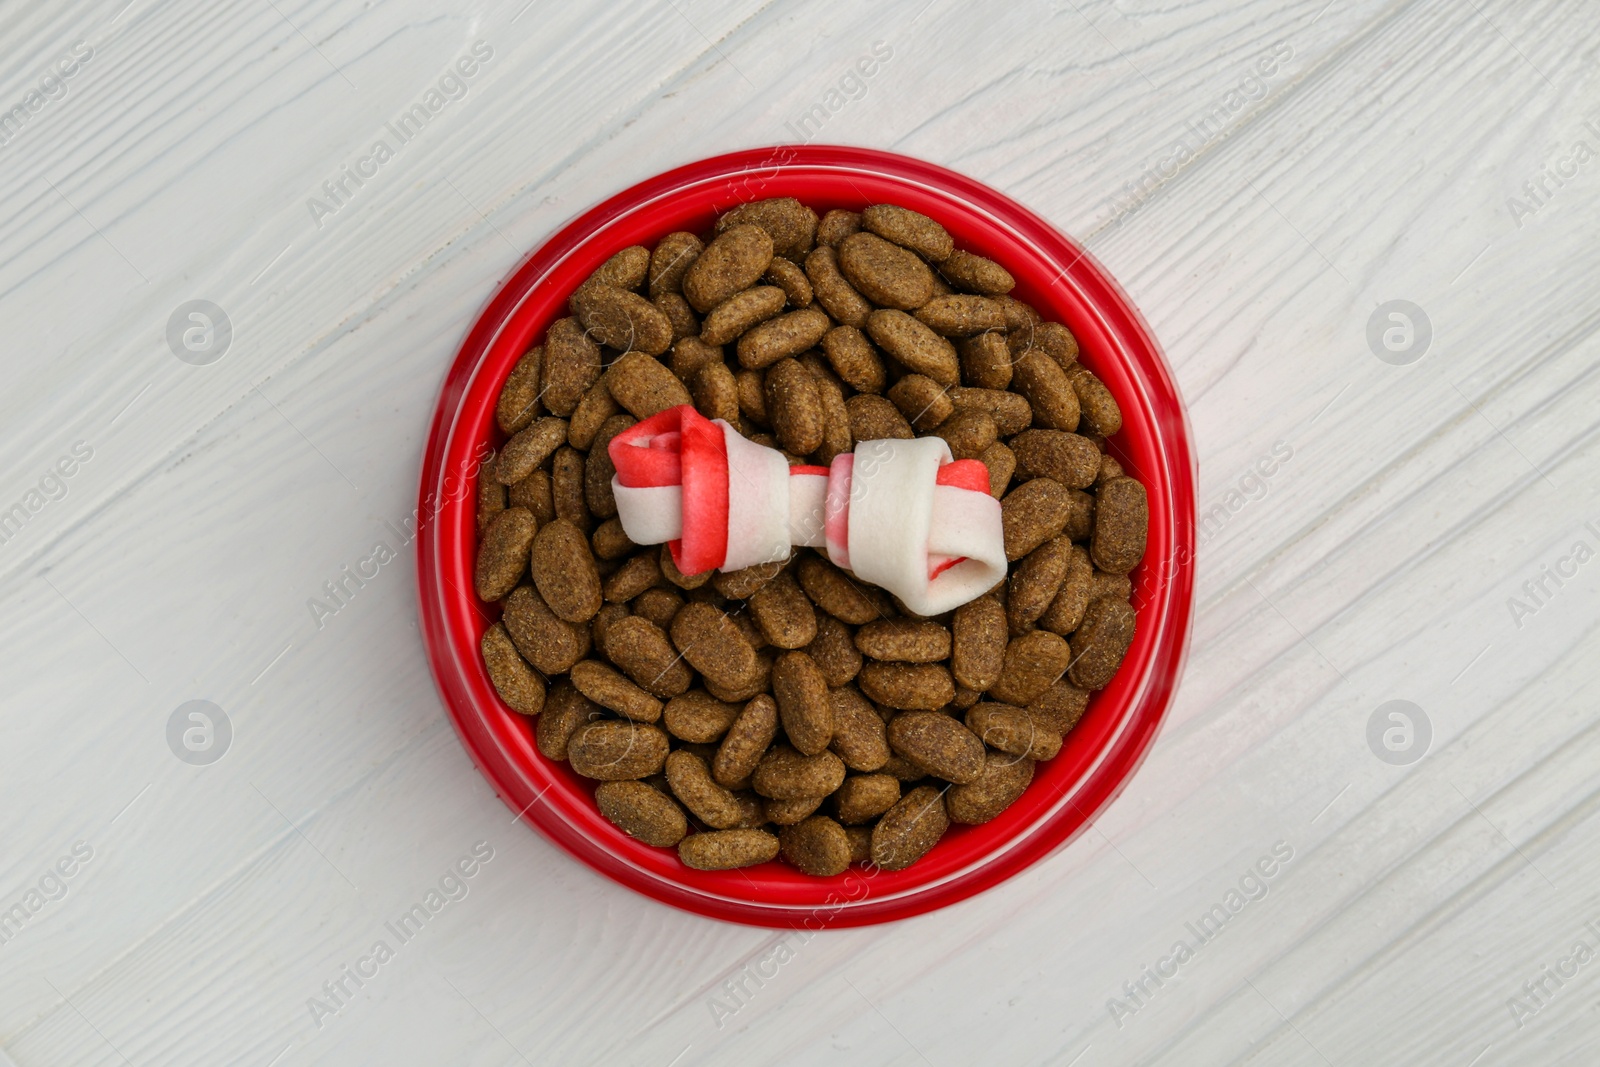 Photo of Dry dog food and treat (knotted chew bone) on white wooden floor, top view